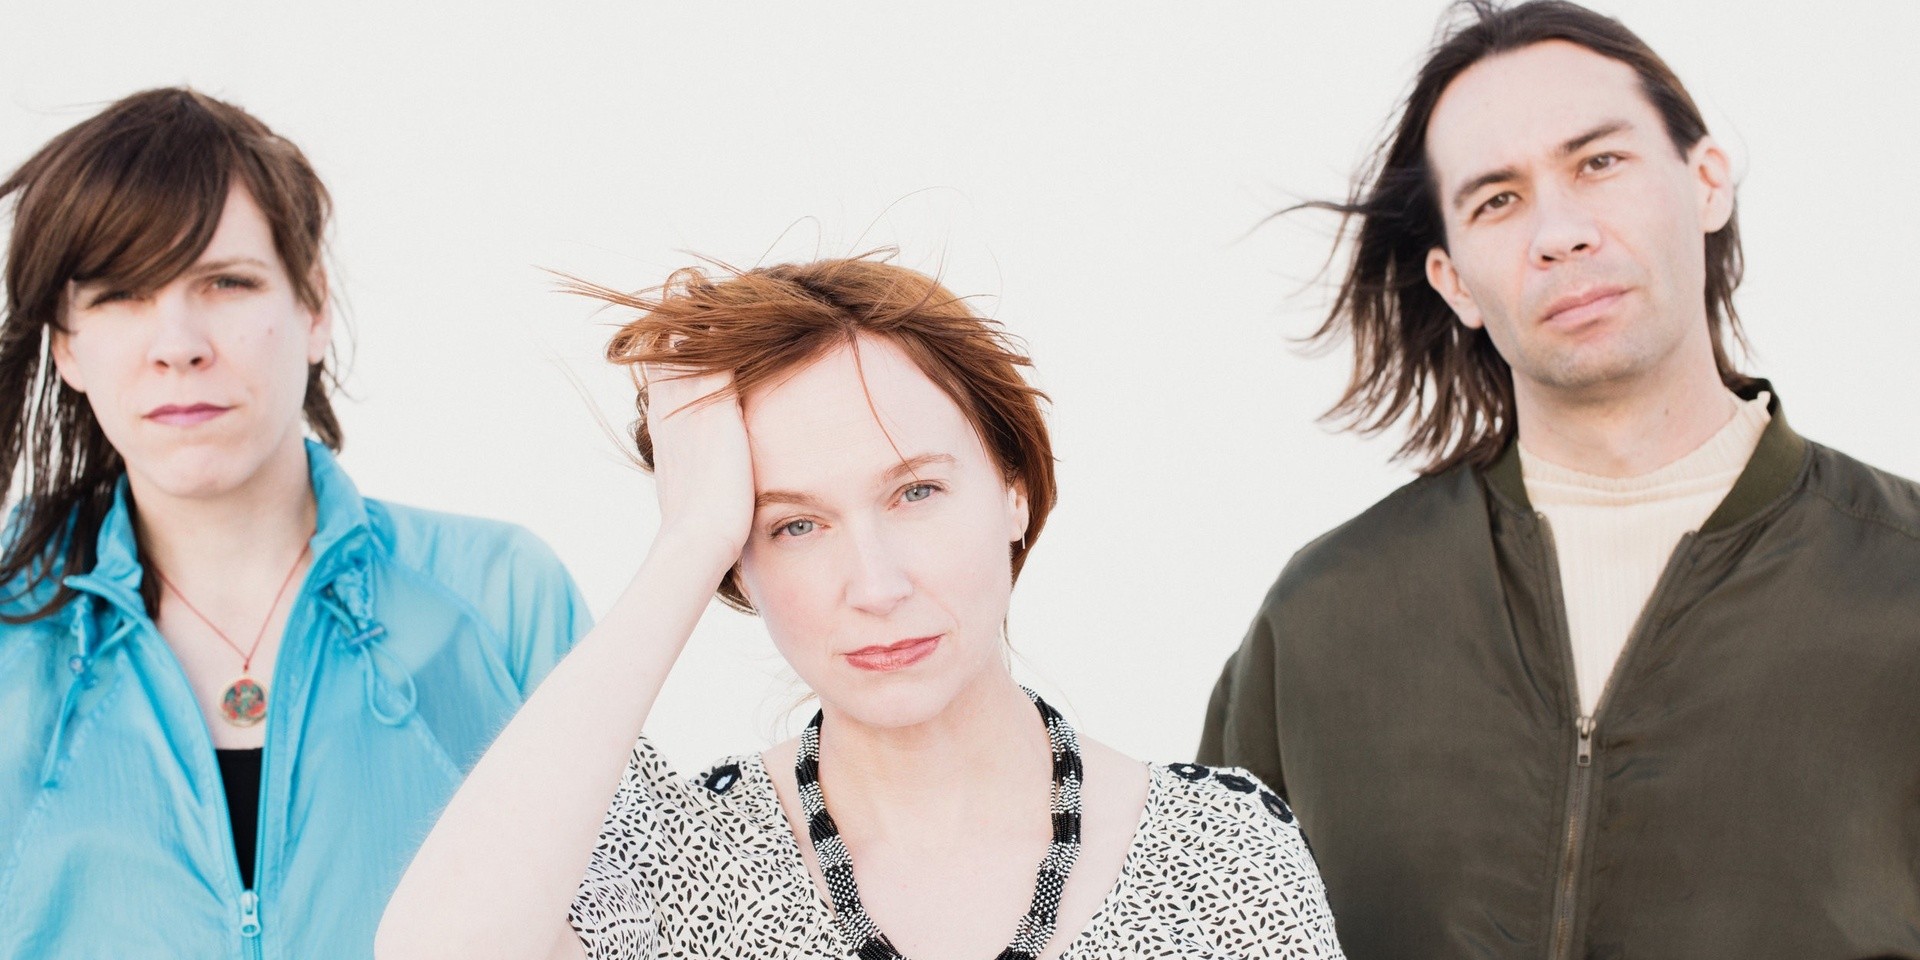 Rainer Maria's Manila show has been cancelled